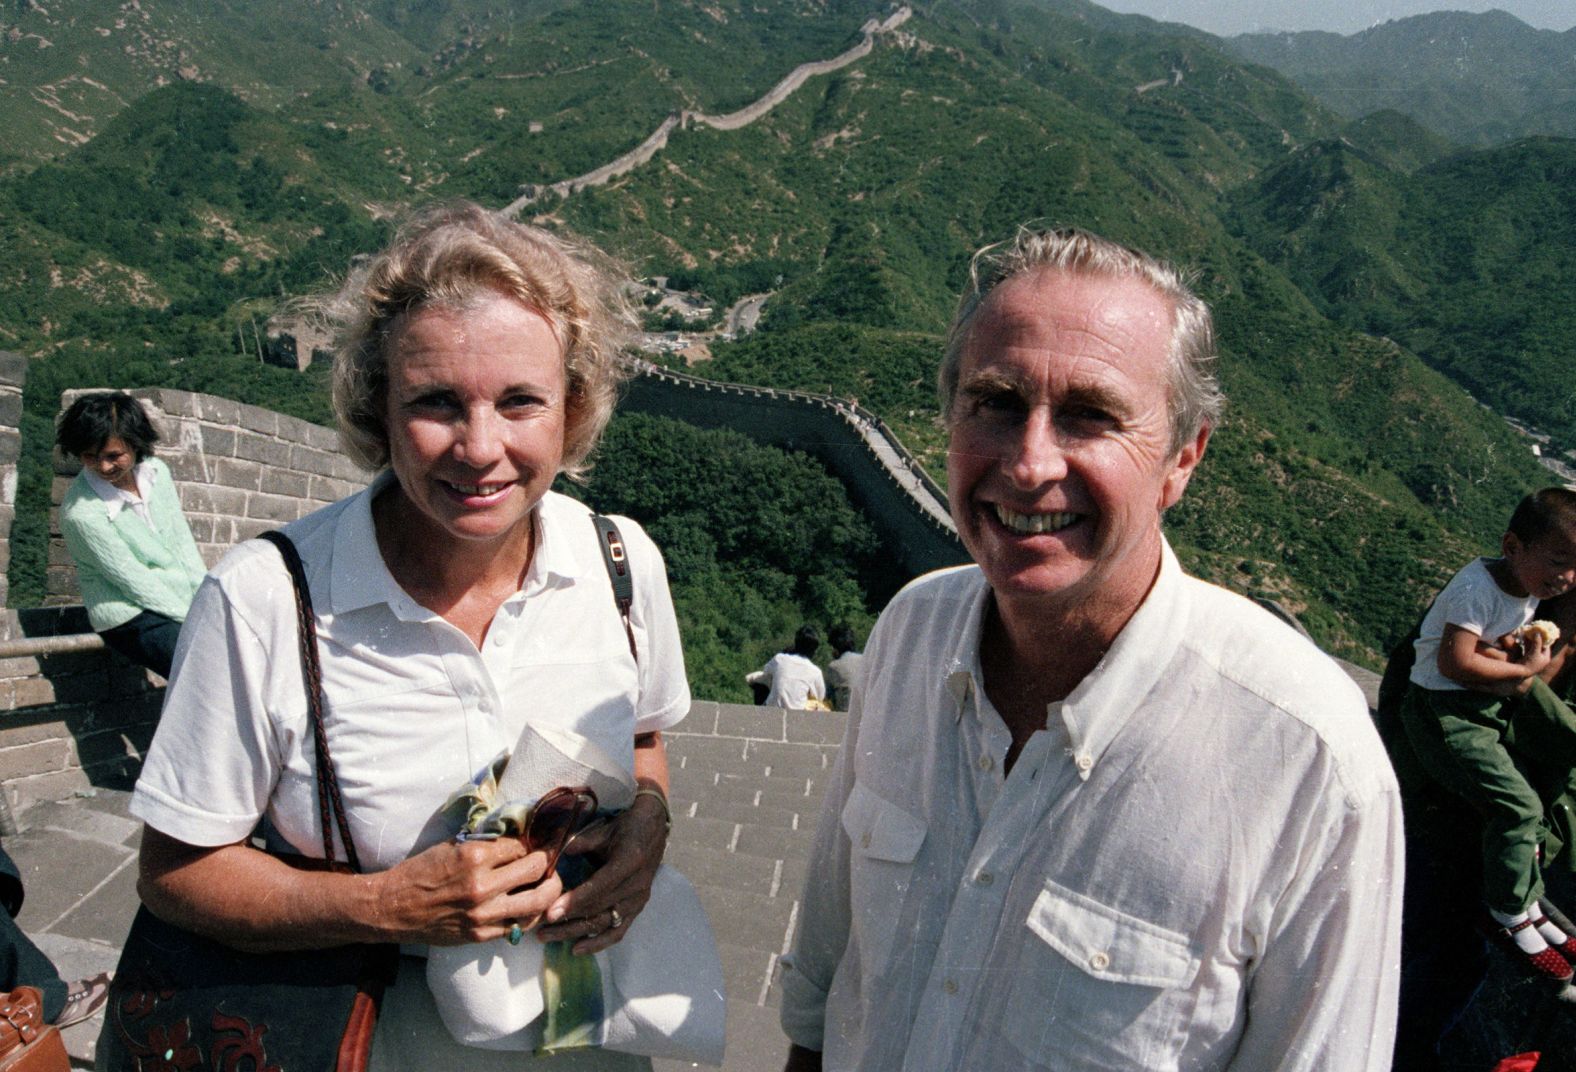 O'Connor and her husband, John, visit the Great Wall of China in 1987.